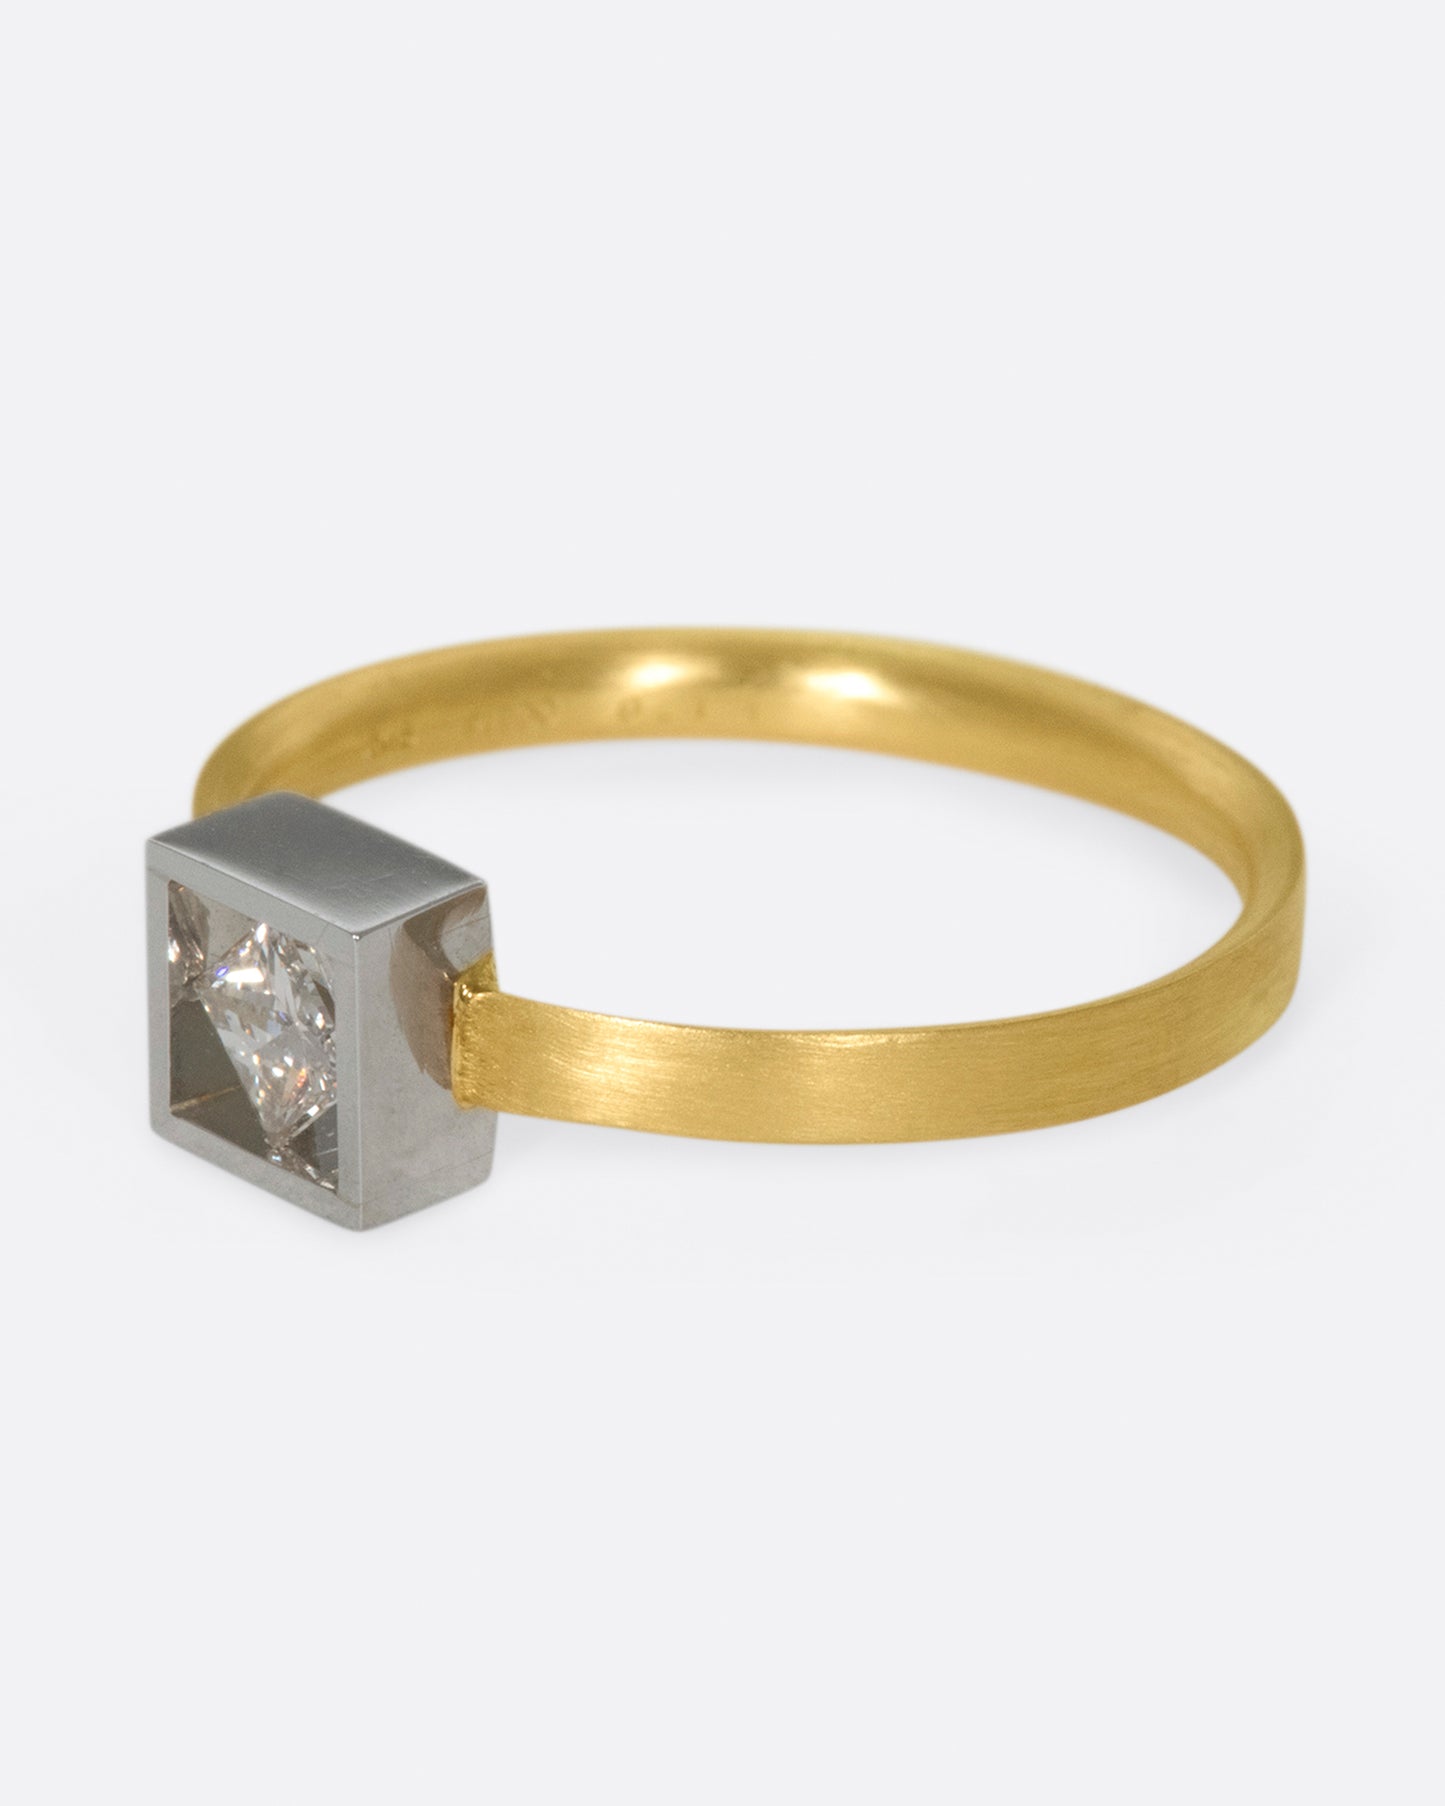 A geometric solitaire ring with a princess cut diamond set on its side in a platinum setting on a yellow gold band.